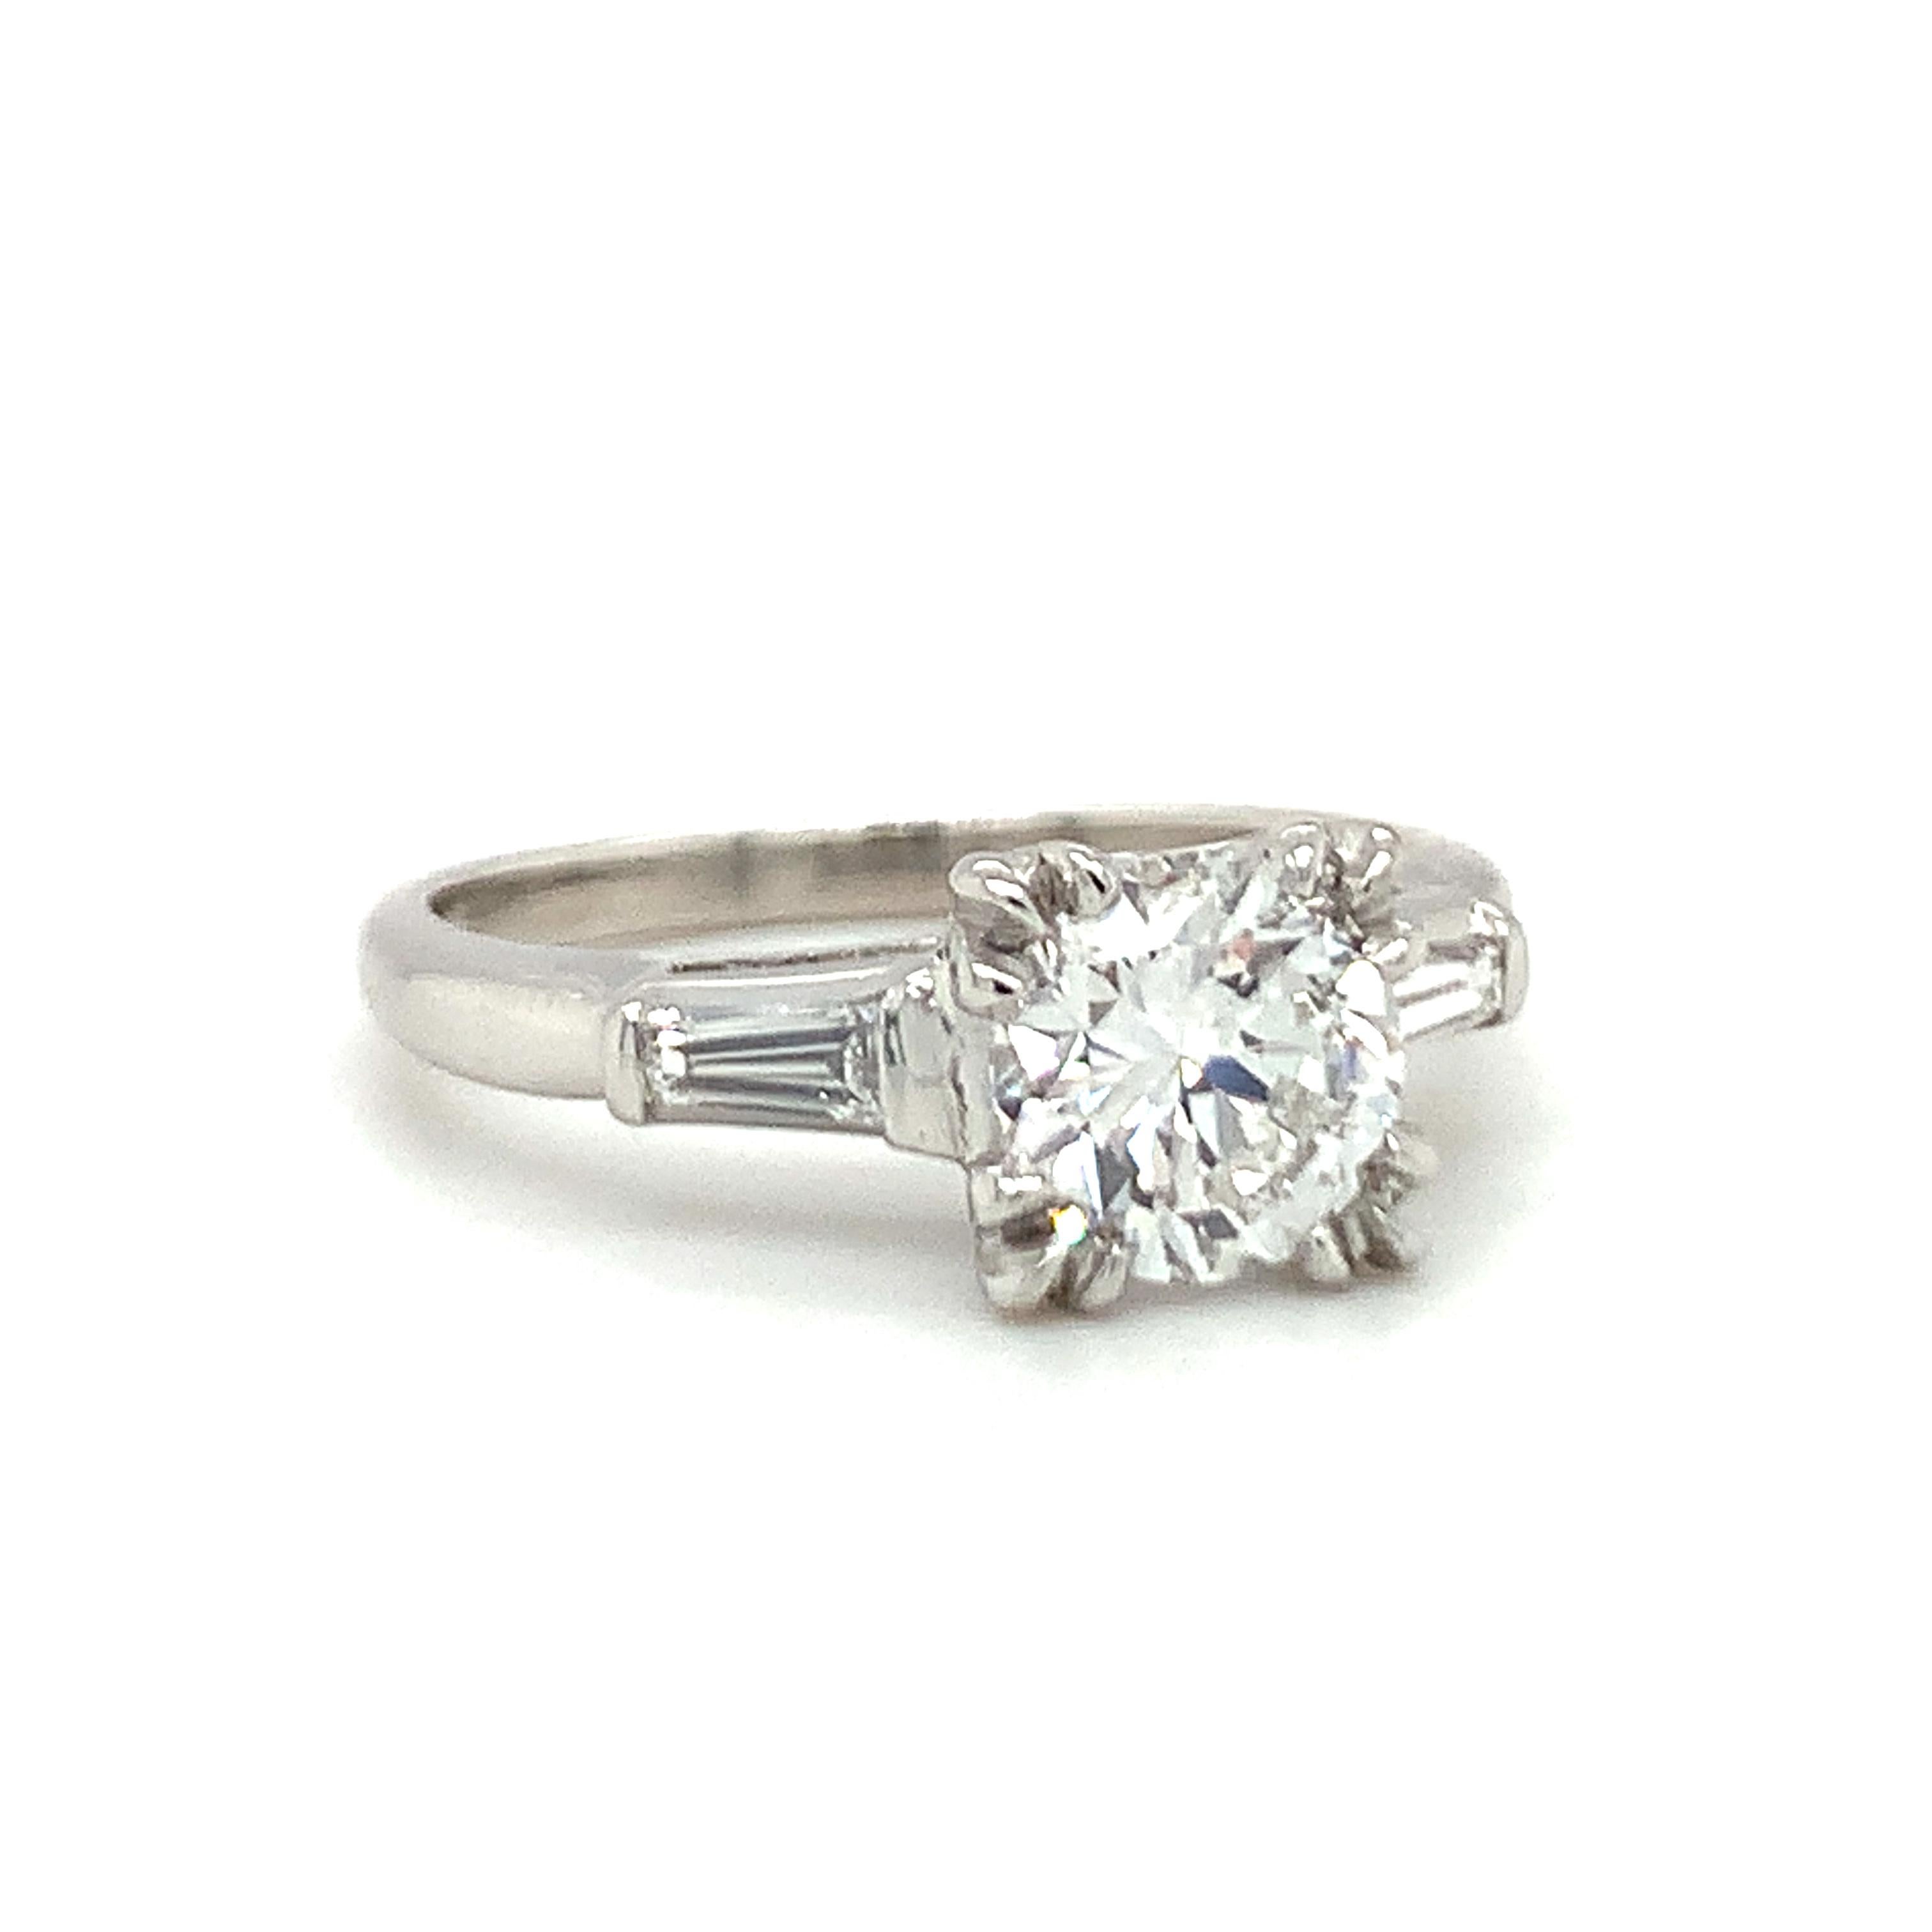 One GIA certified 1.04 ct. diamond platinum engagement ring featuring one prong set, transitional round brilliant cut diamond weighing 1.04 ct. with E color and VS-1 clarity. The featured diamond is flanked by two tapered baguette diamonds weighing